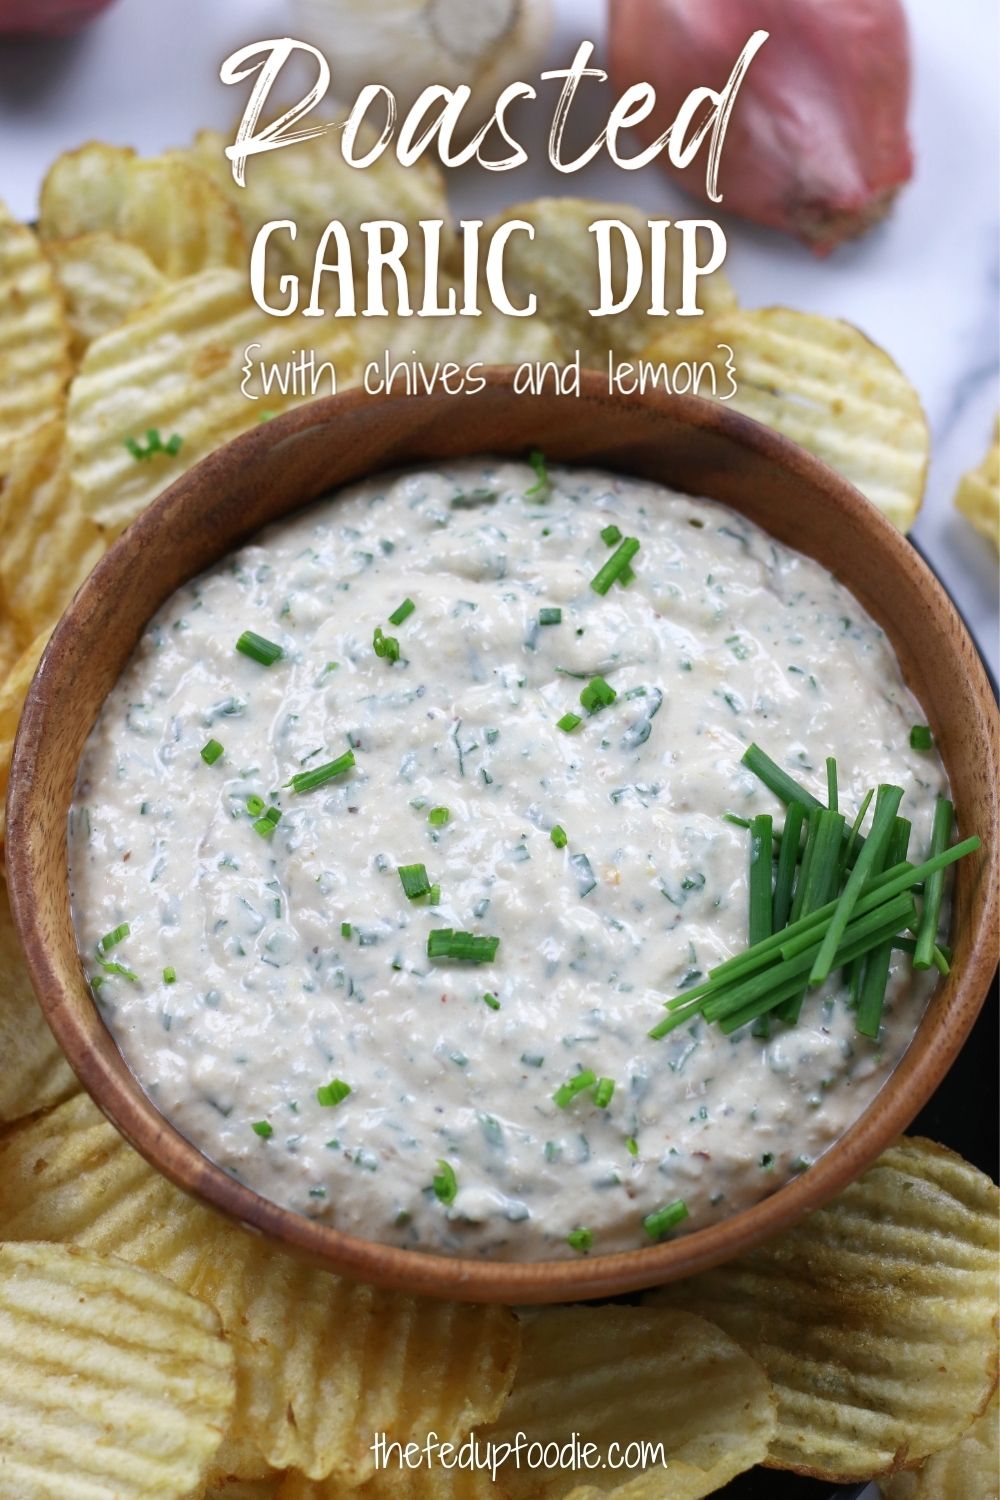 Roasted Garlic Dip is creamy and savory with bright flavors. Roasting the garlic creates a mild sweet and yet savory companion to the caramelized shallots. Lemon, chives and parsley brings in a brightness that makes this dip amazing as an appetizer and compliments veggies. #RoastedGarlicDip #RoastedGarlicDipAppetizers #RoastedGarlicRecipes #AppetizerRecipes #RoastedGarlicAndOnionDip 